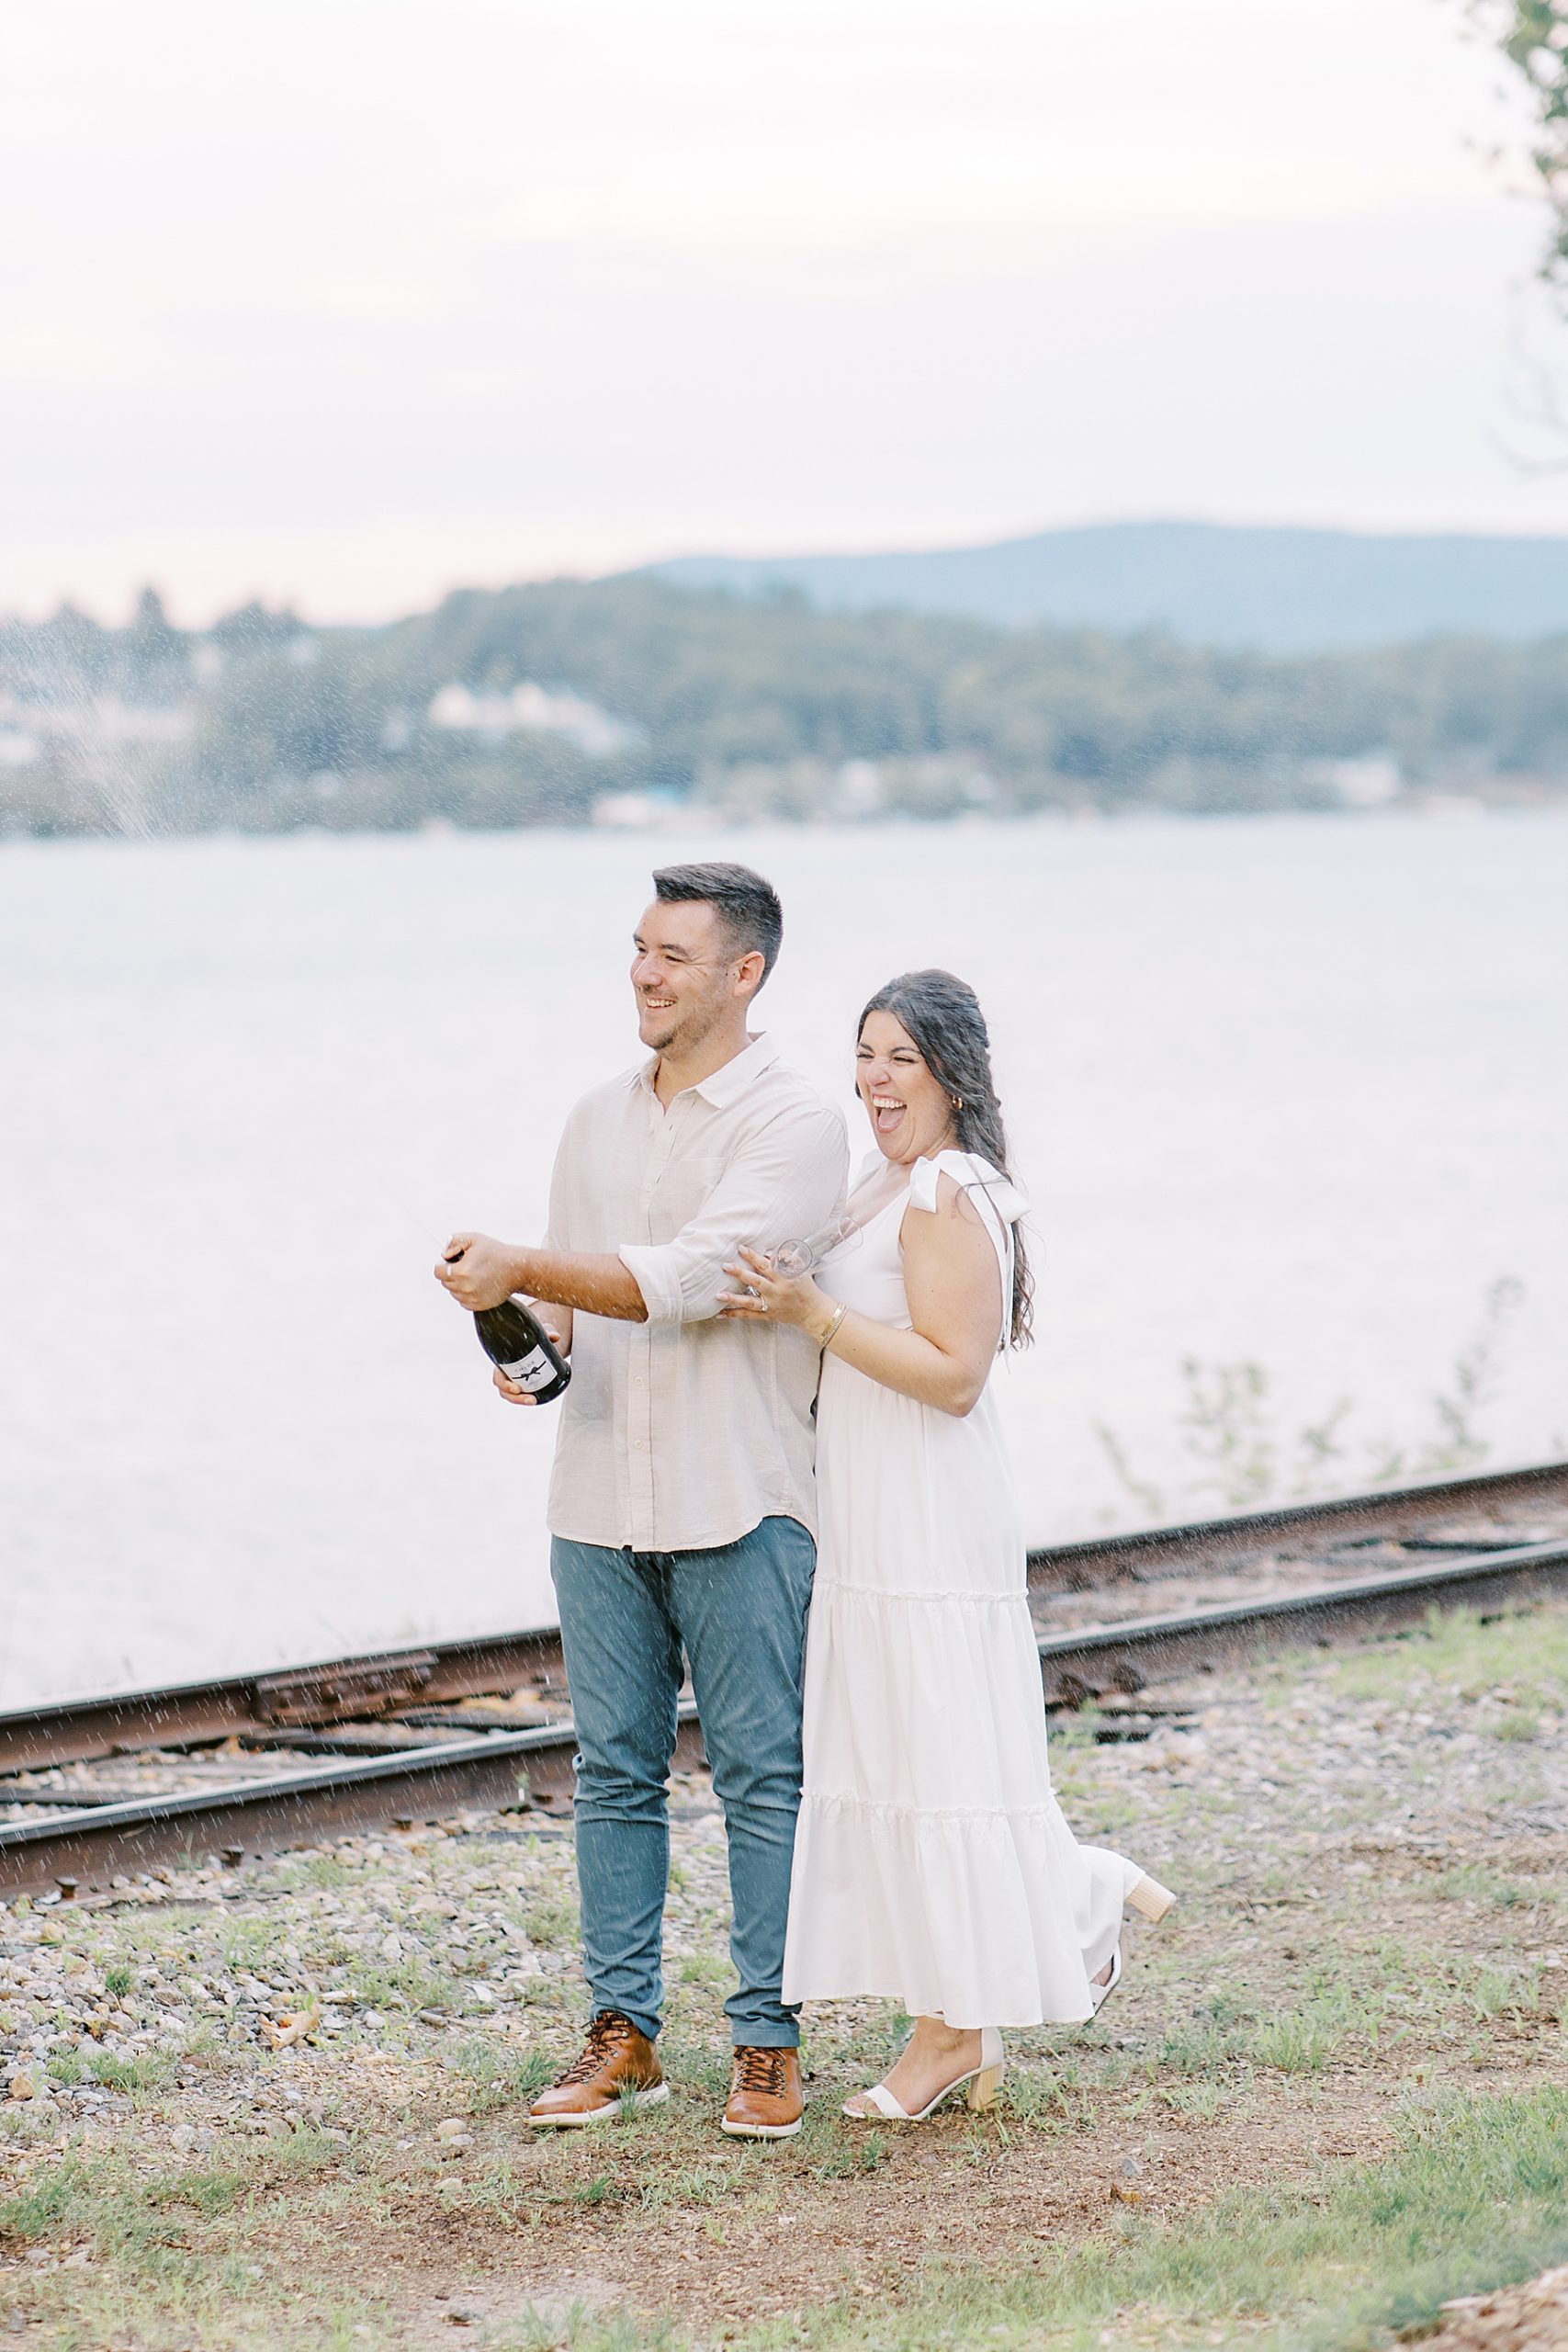 engaged couple pop champagne to celebrate during engagement session